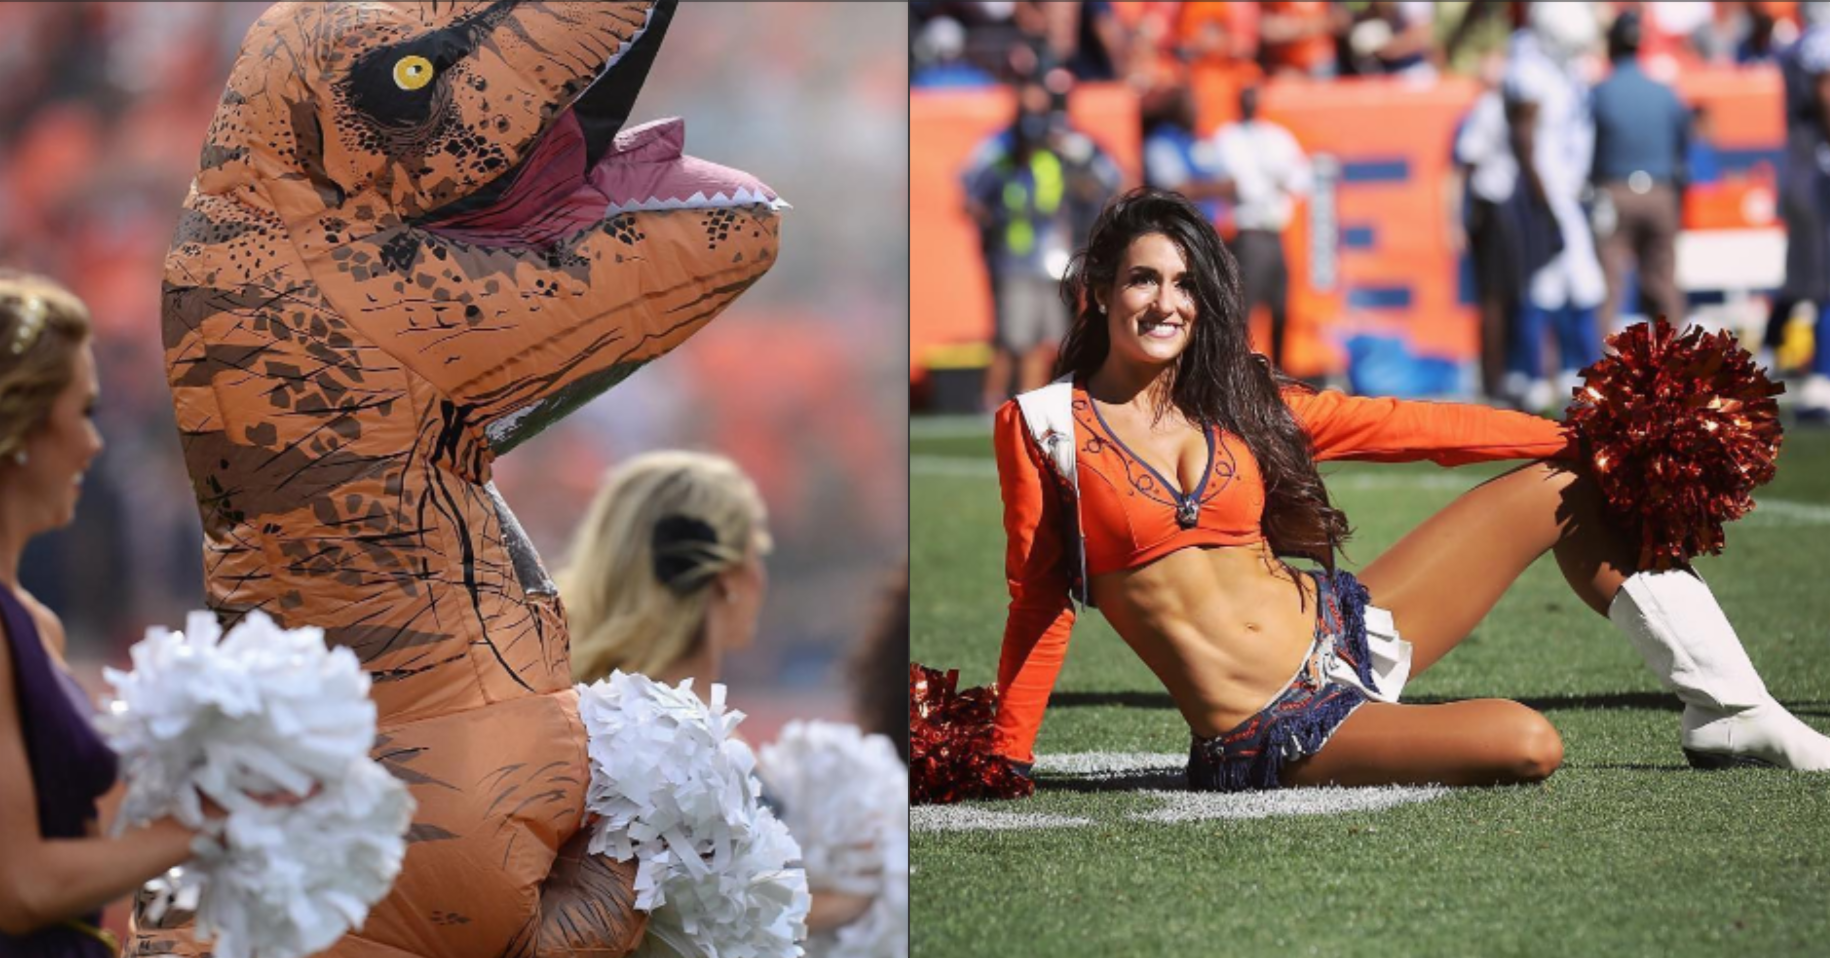 The Denver Broncos Cheerleader Who Dressed Up as a T-Rex Is Way Hotter Out ...